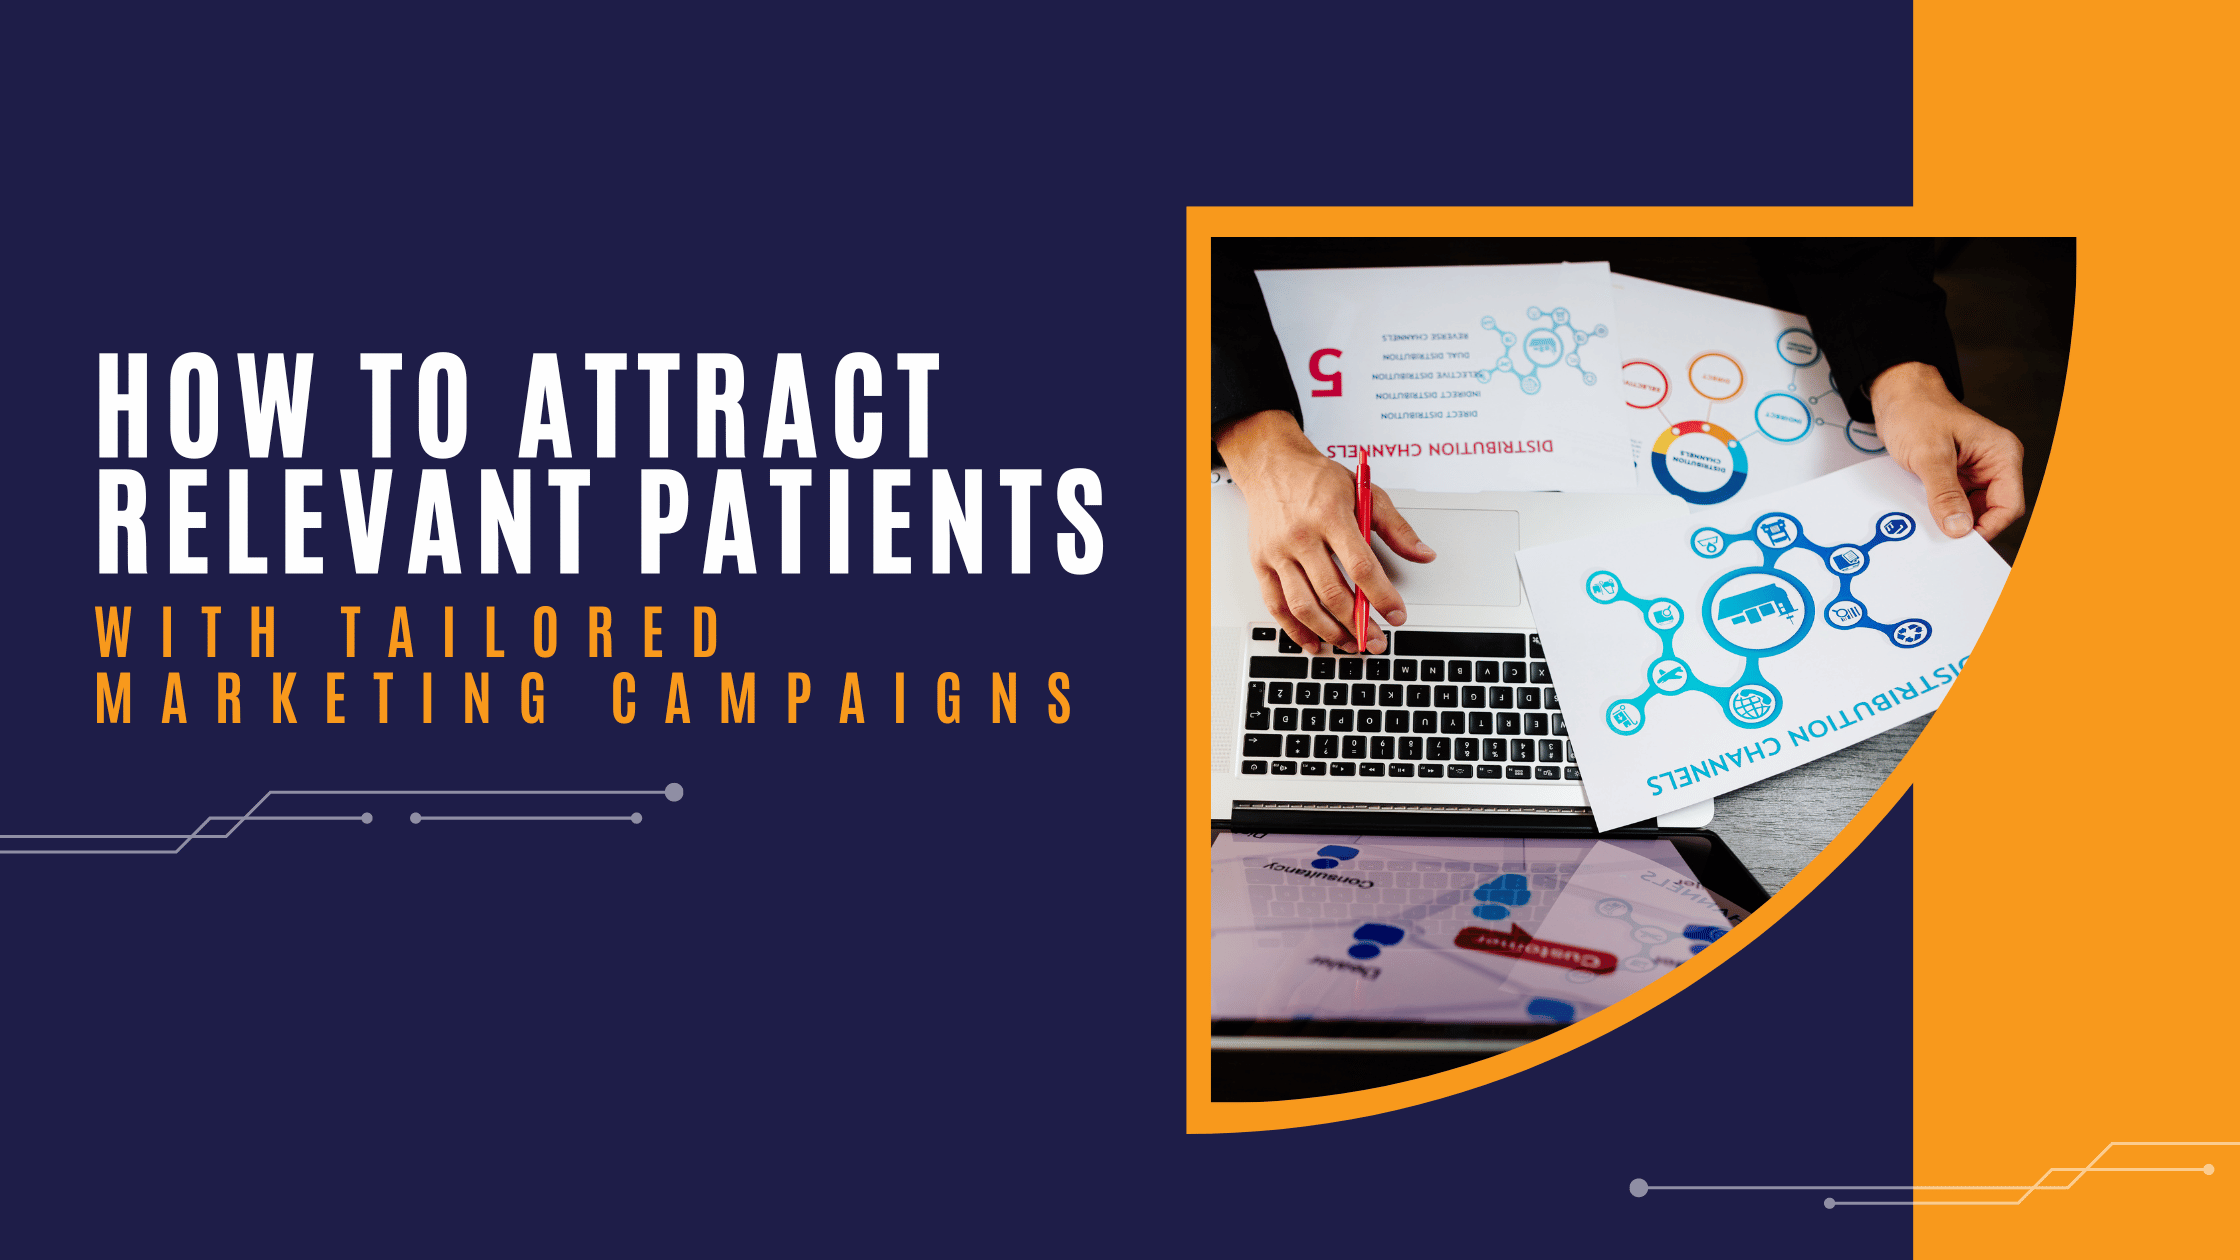 How to Attract Relevant Patients with Tailored Marketing Campaigns